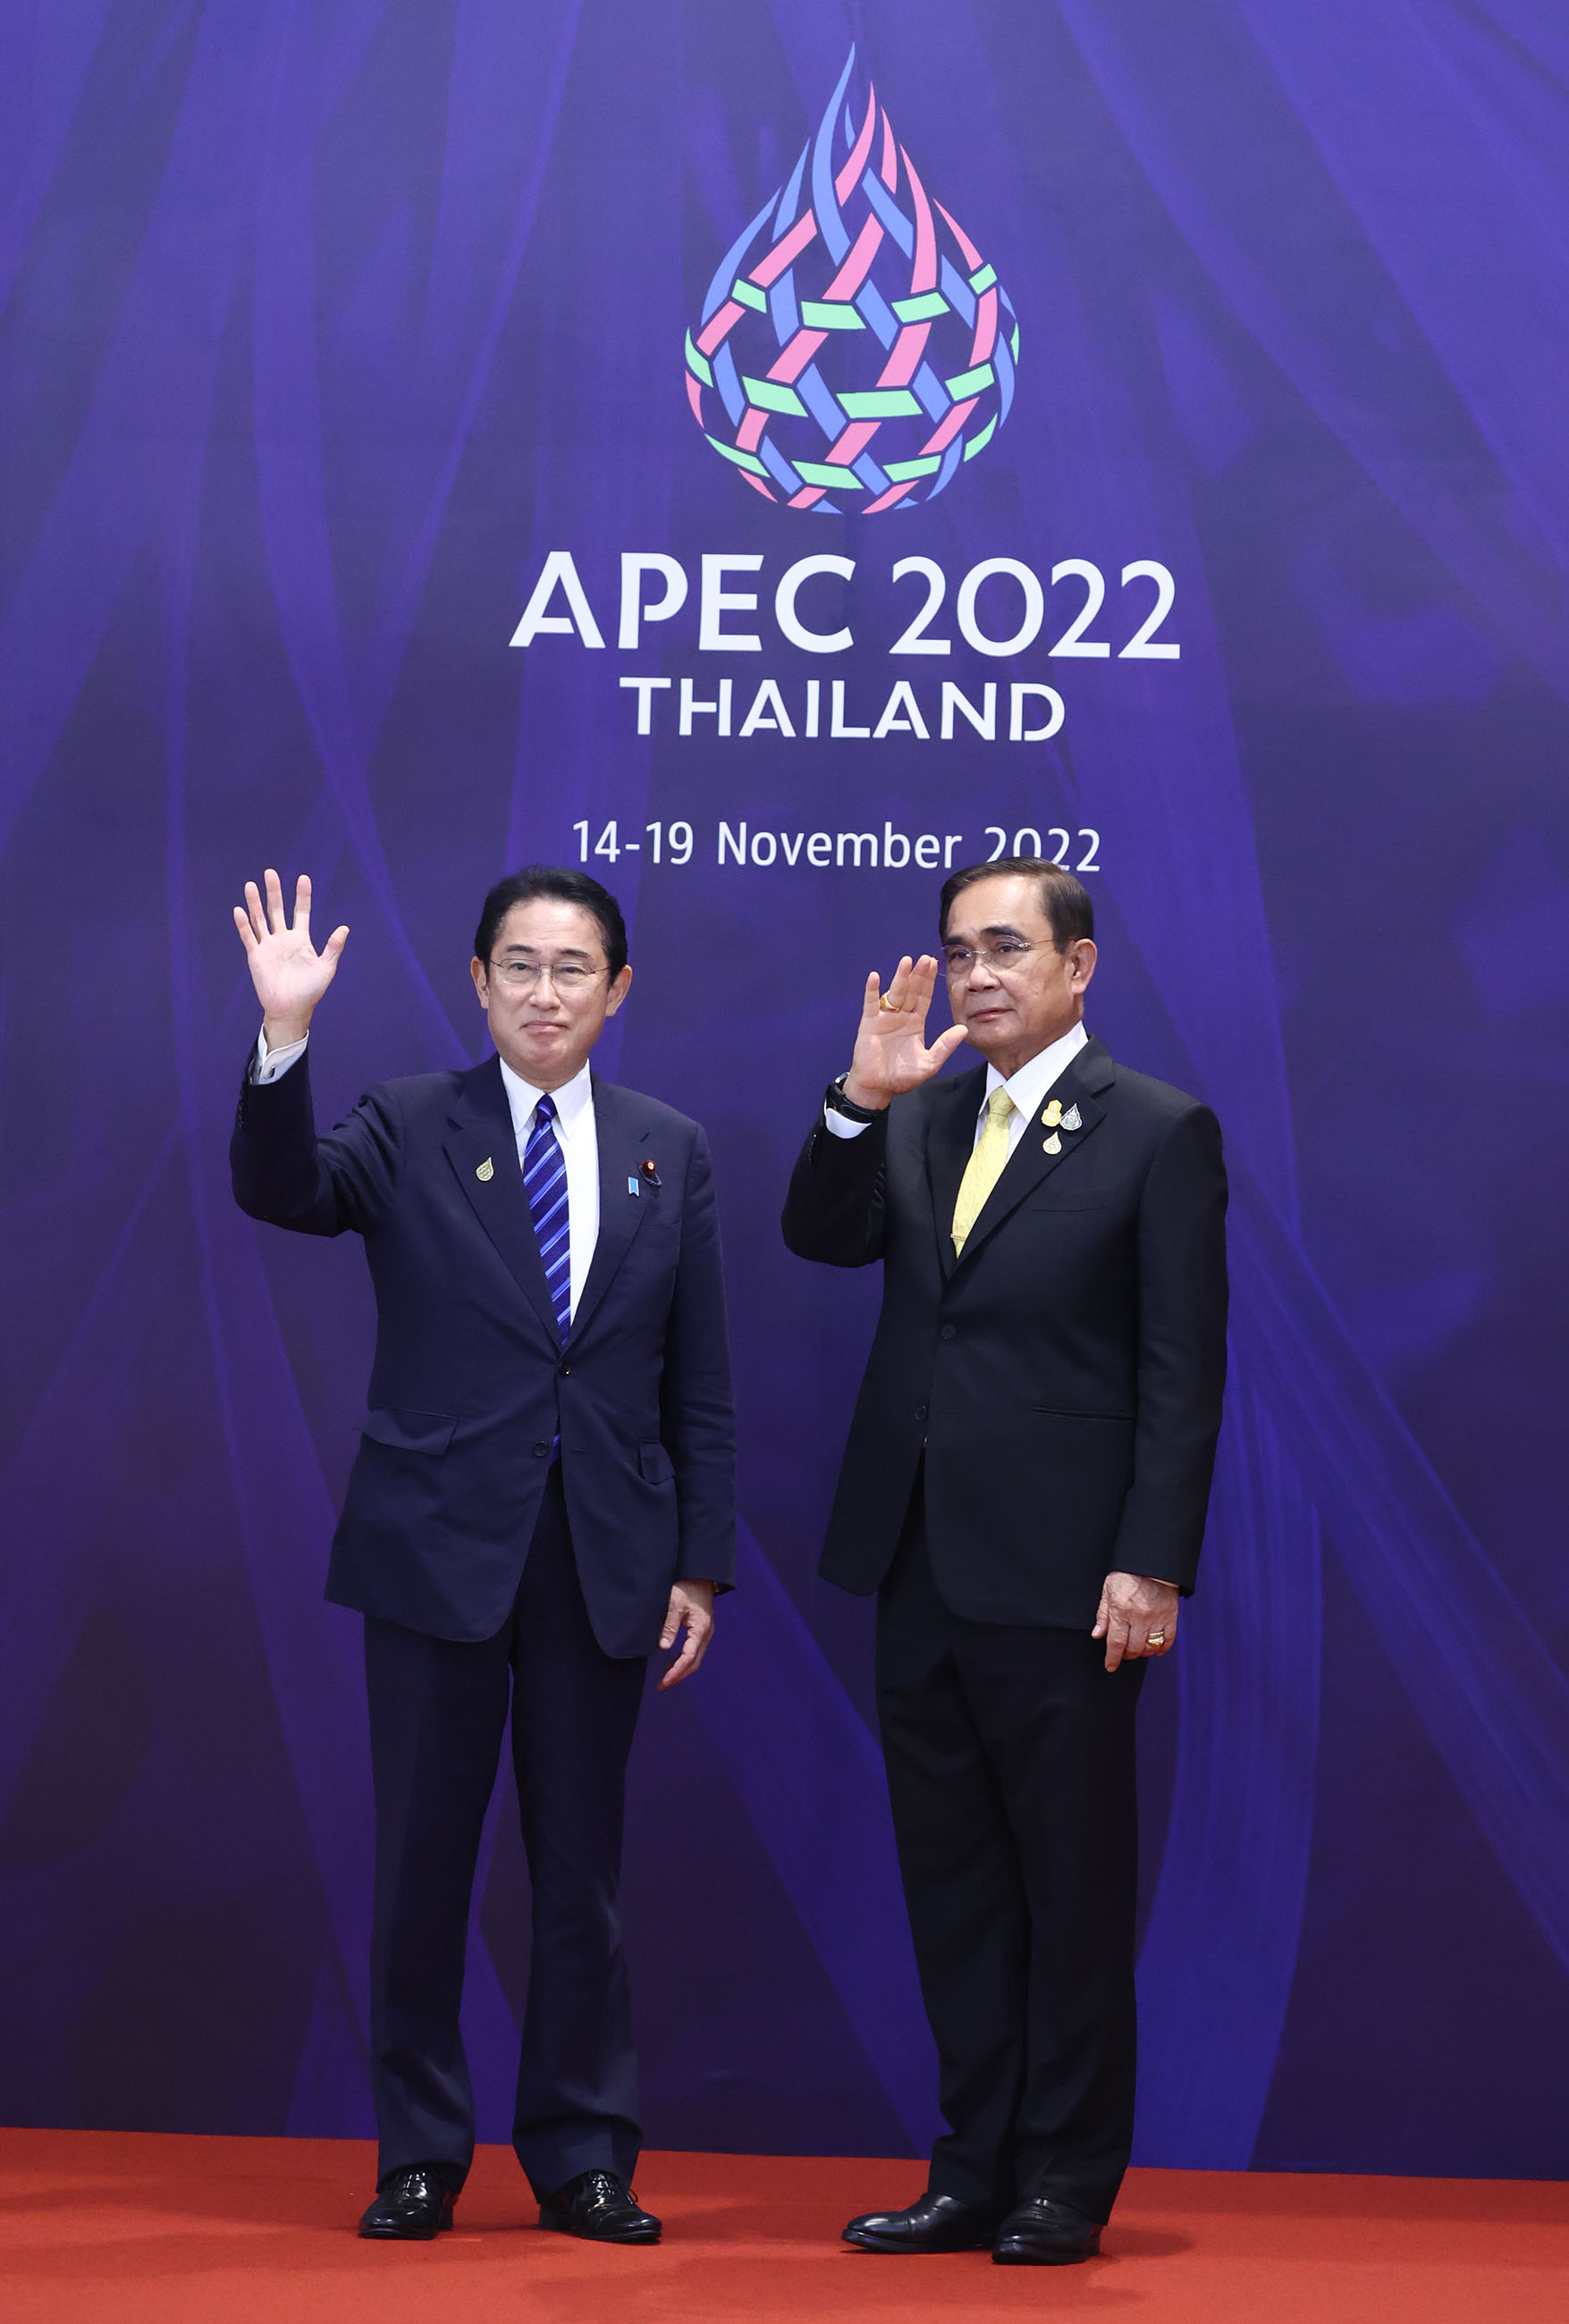 Prime Minister Kishida welcomed by Prime Minister and Minister of Defense Prayuth Chan-ocha of Thailand (3)